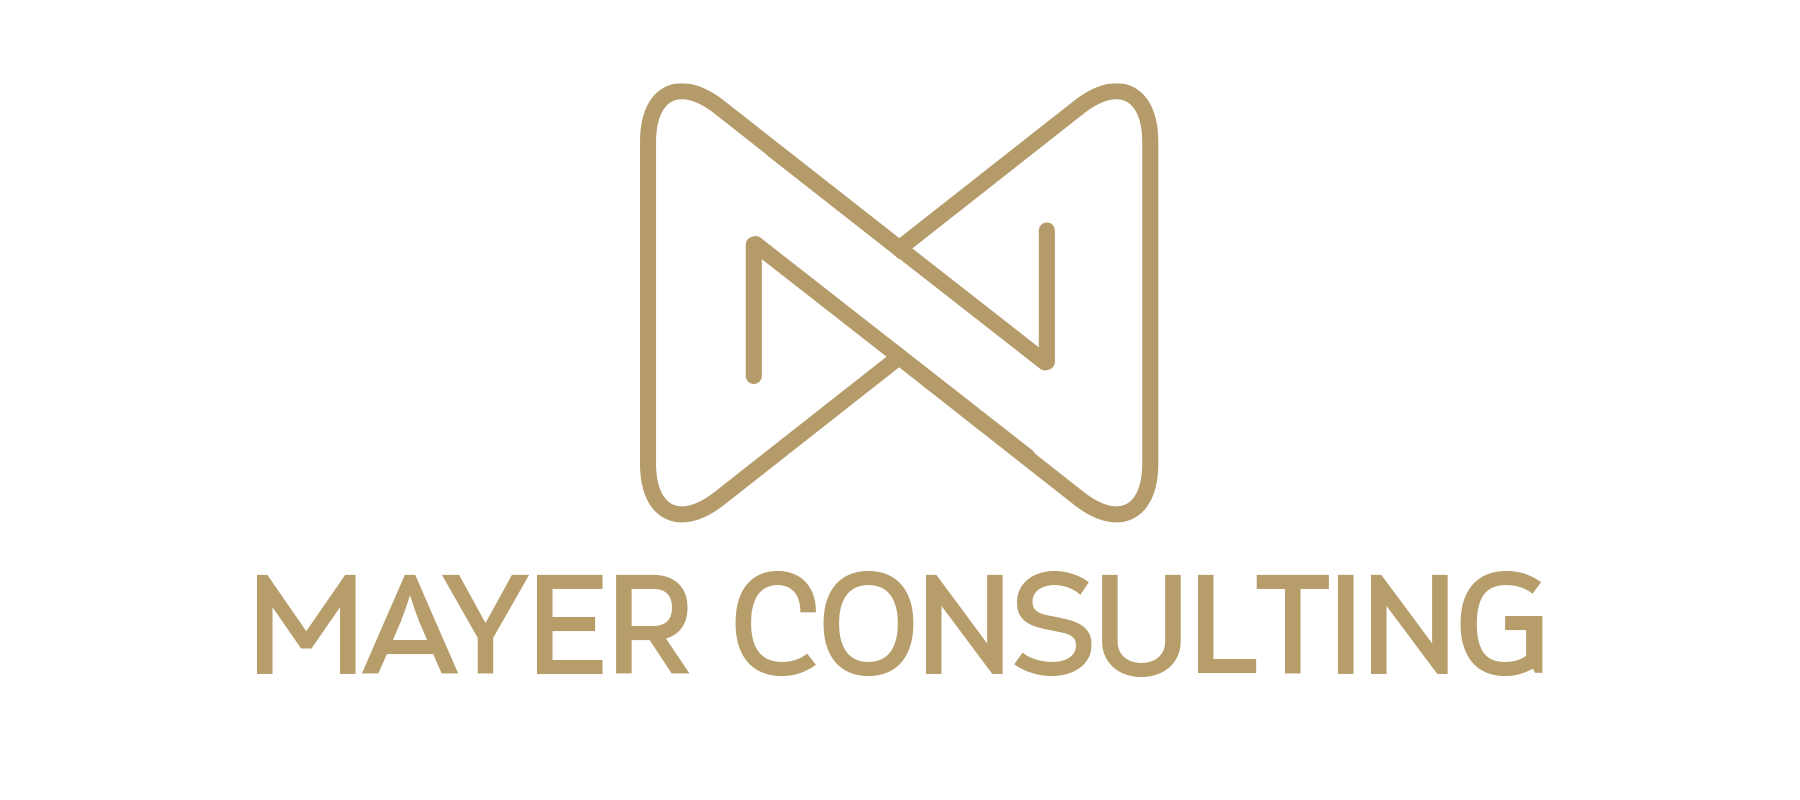 MAYER Consulting